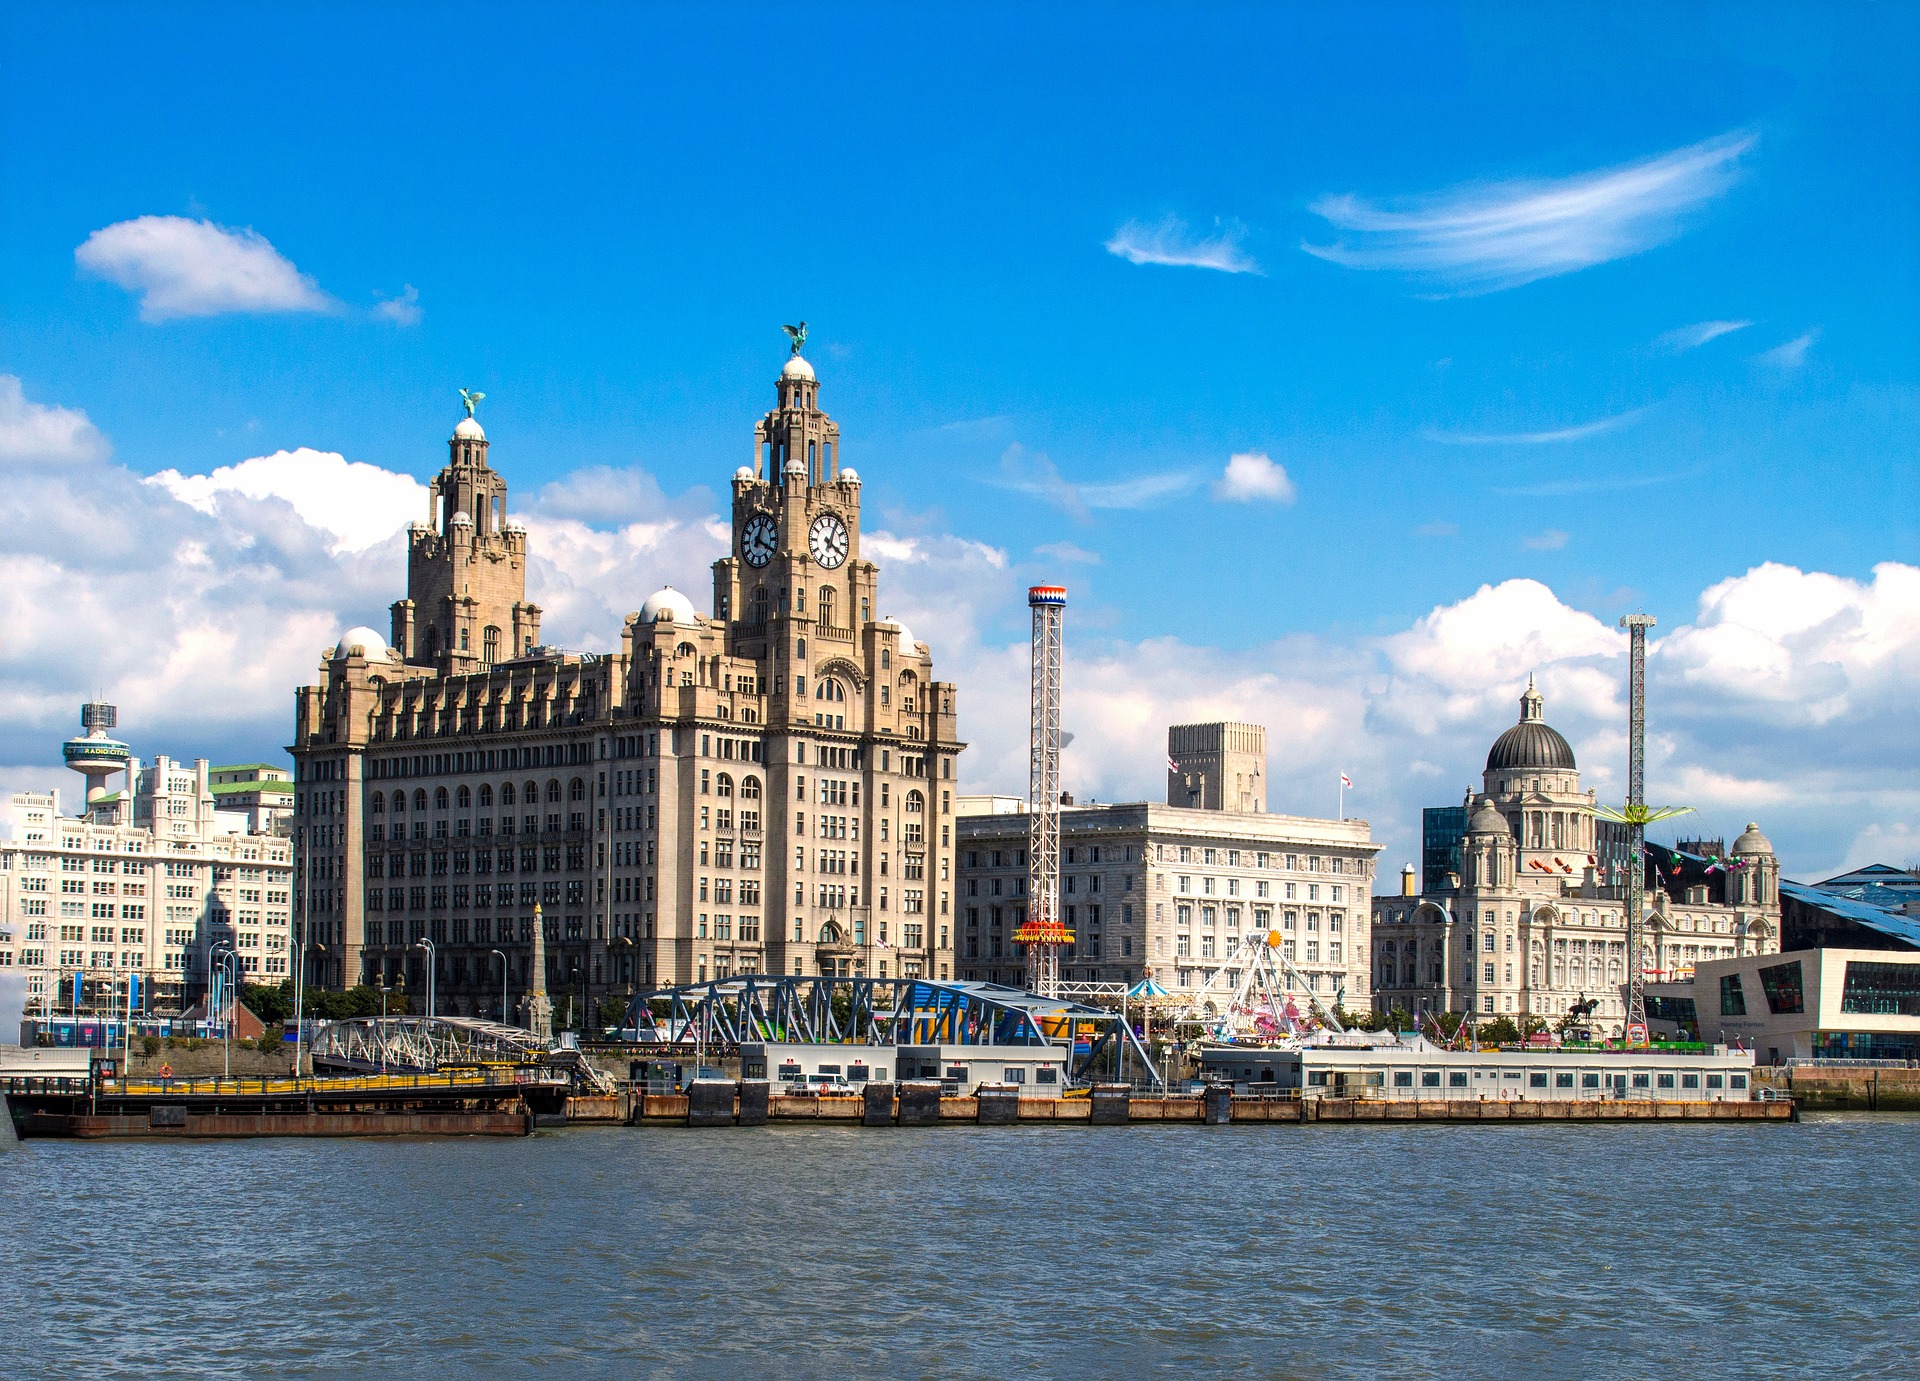 Liverpool Image by Alan Wright from Pixabay